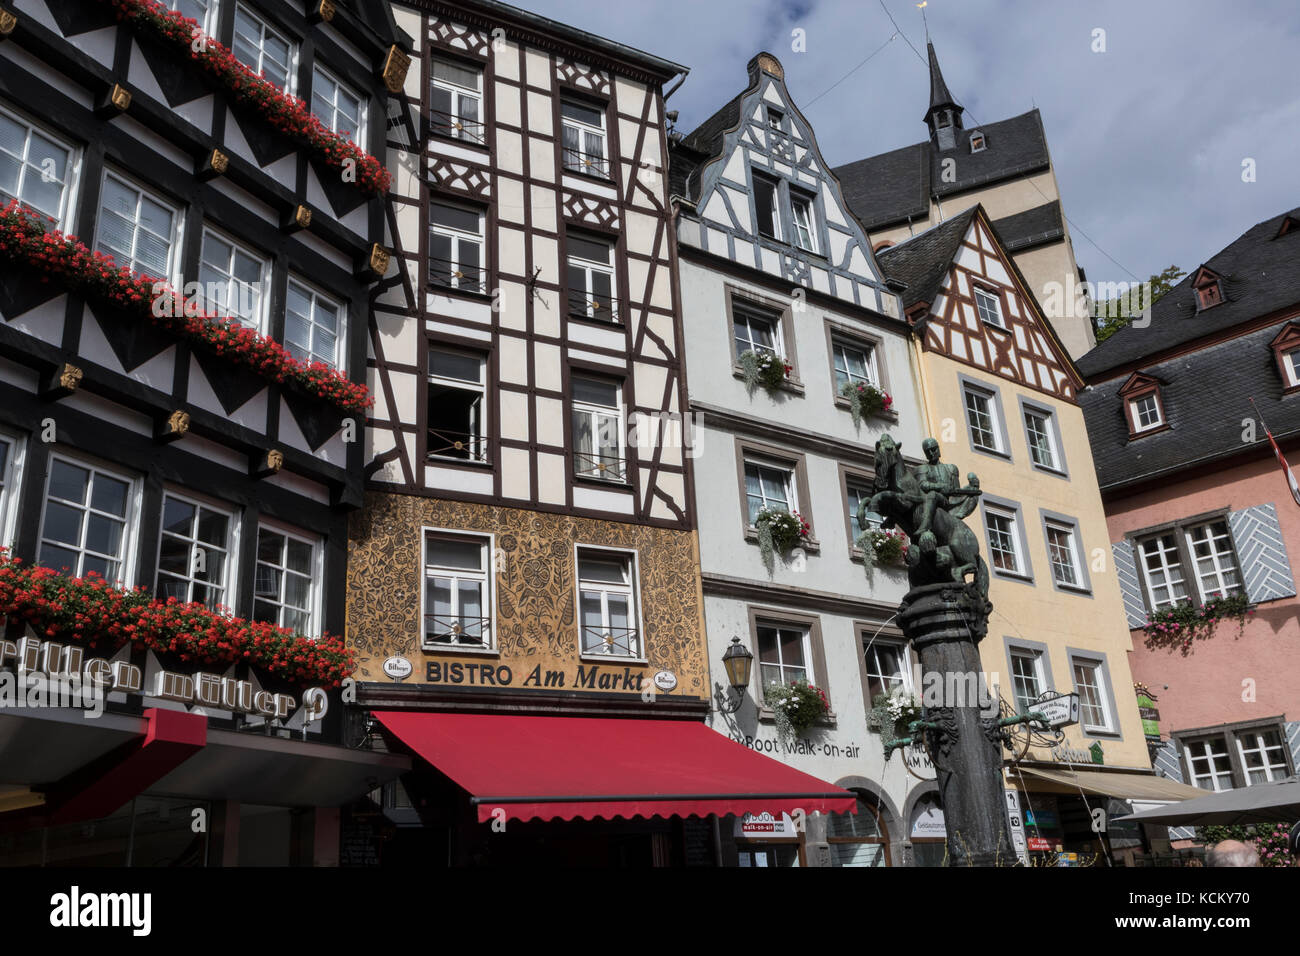 Main square in the town of Cochem, in the Mosel Valley, Germany Stock Photo